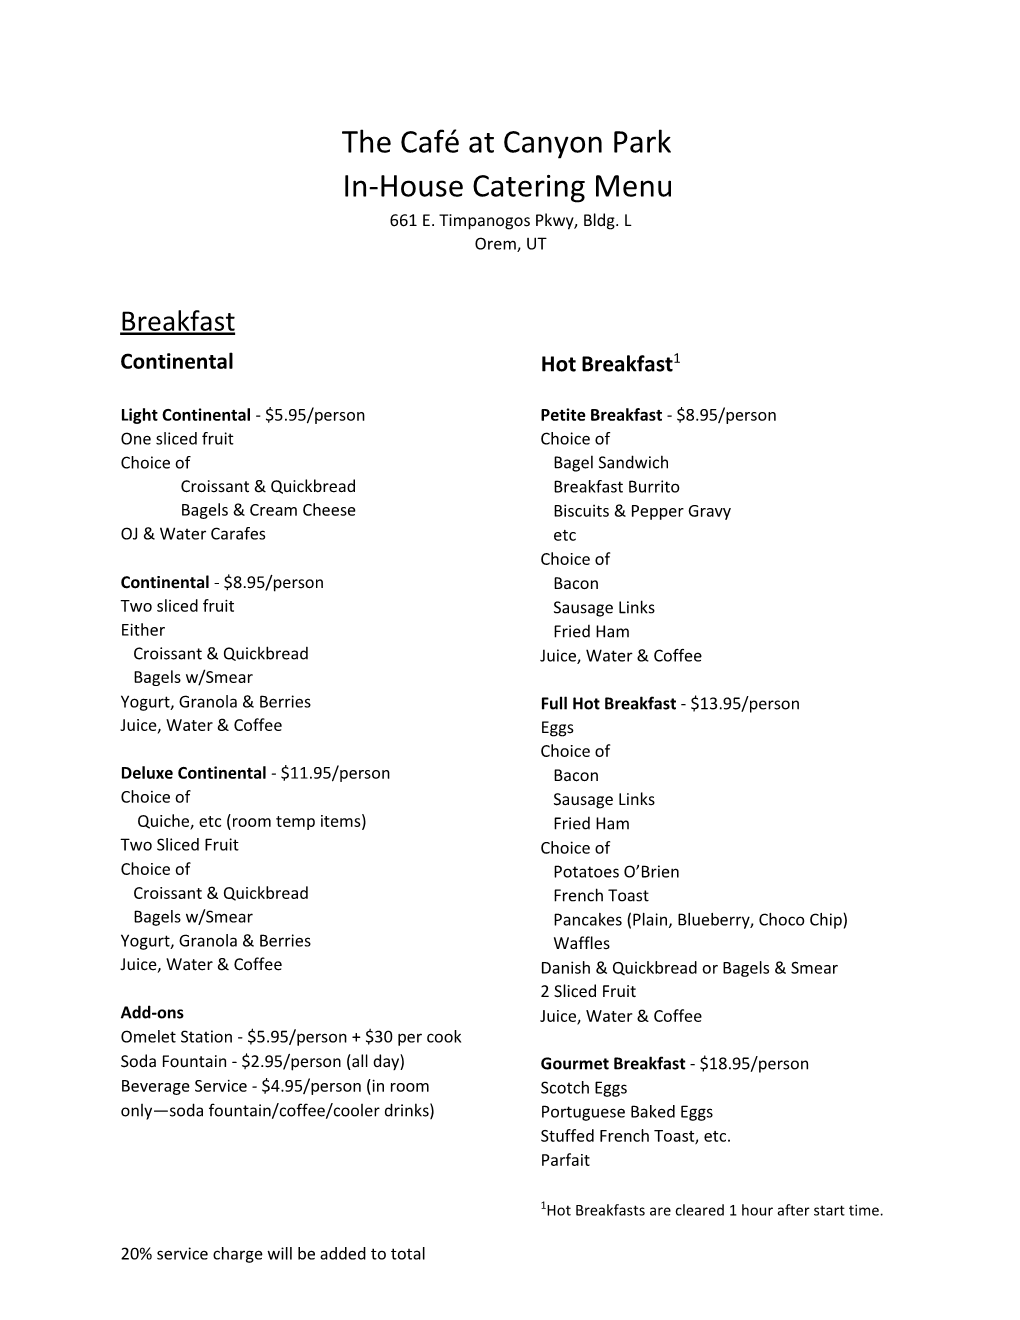 The Café at Canyon Park In-House Catering Menu 661 E